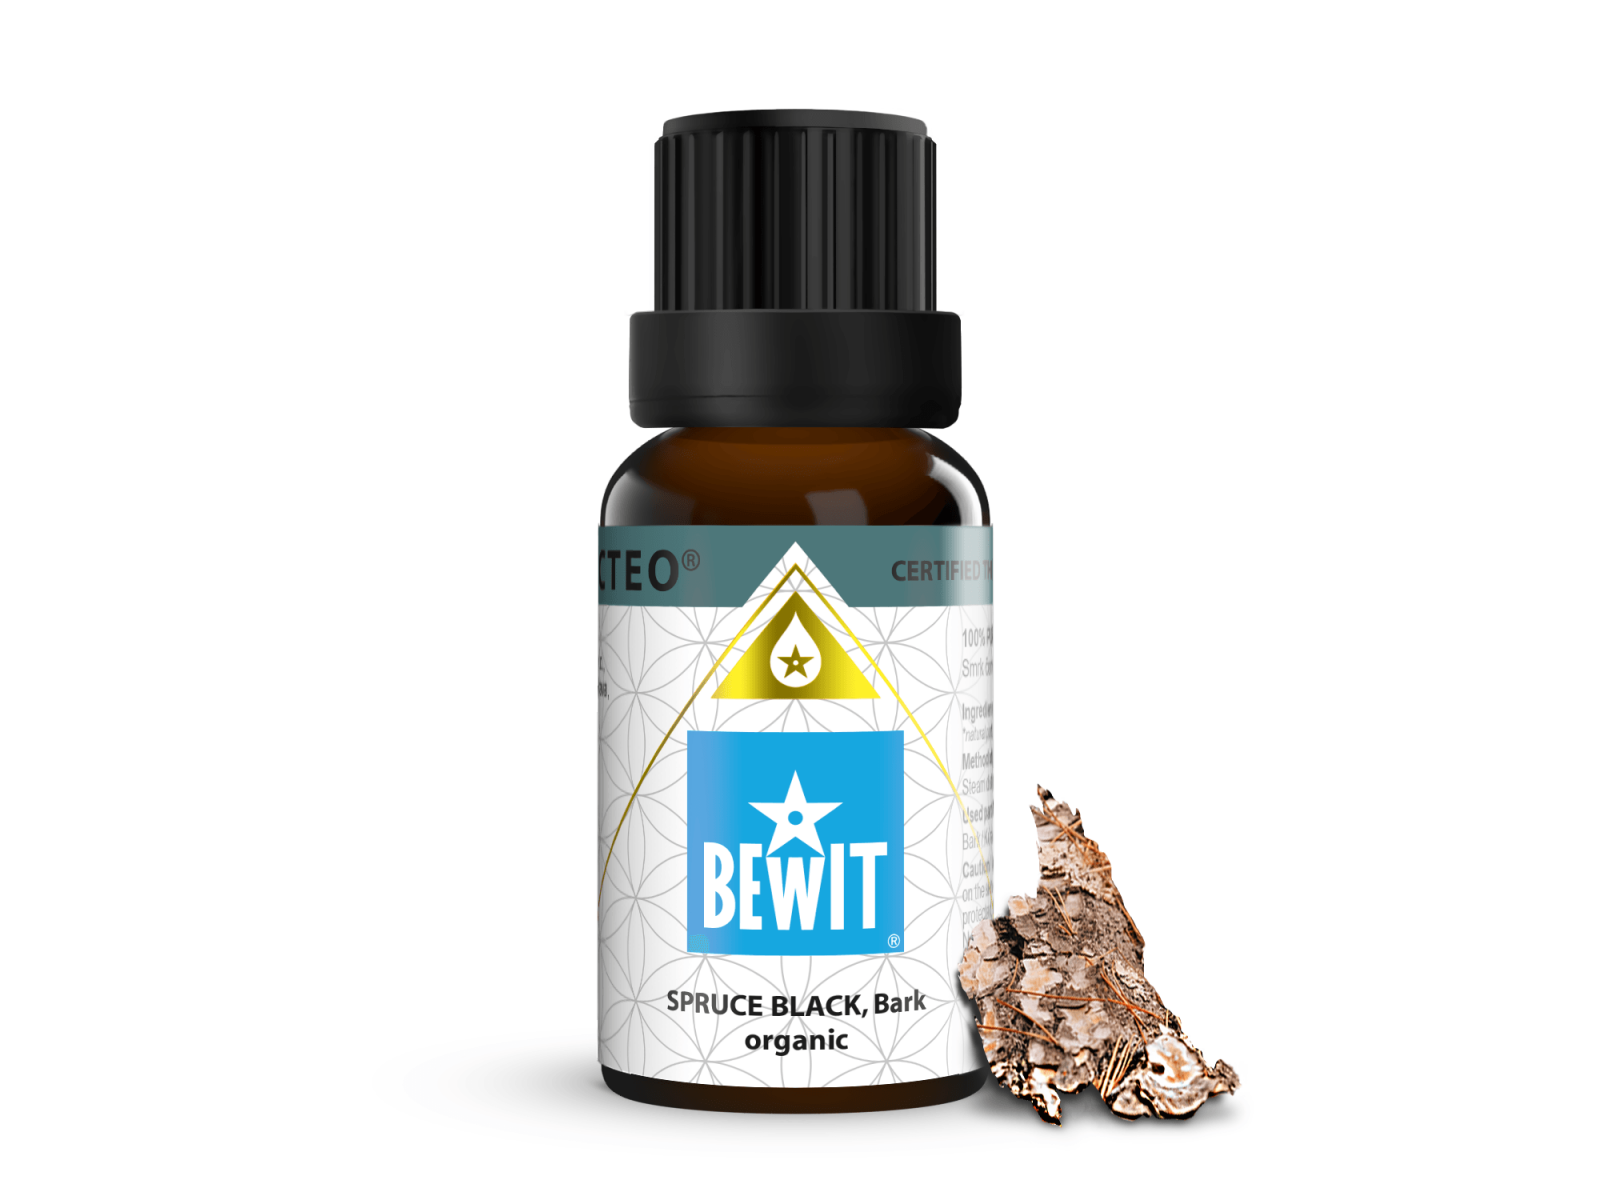 BEWIT Black spruce, bark ORGANIC - 100% pure and natural CTEO® essential oil